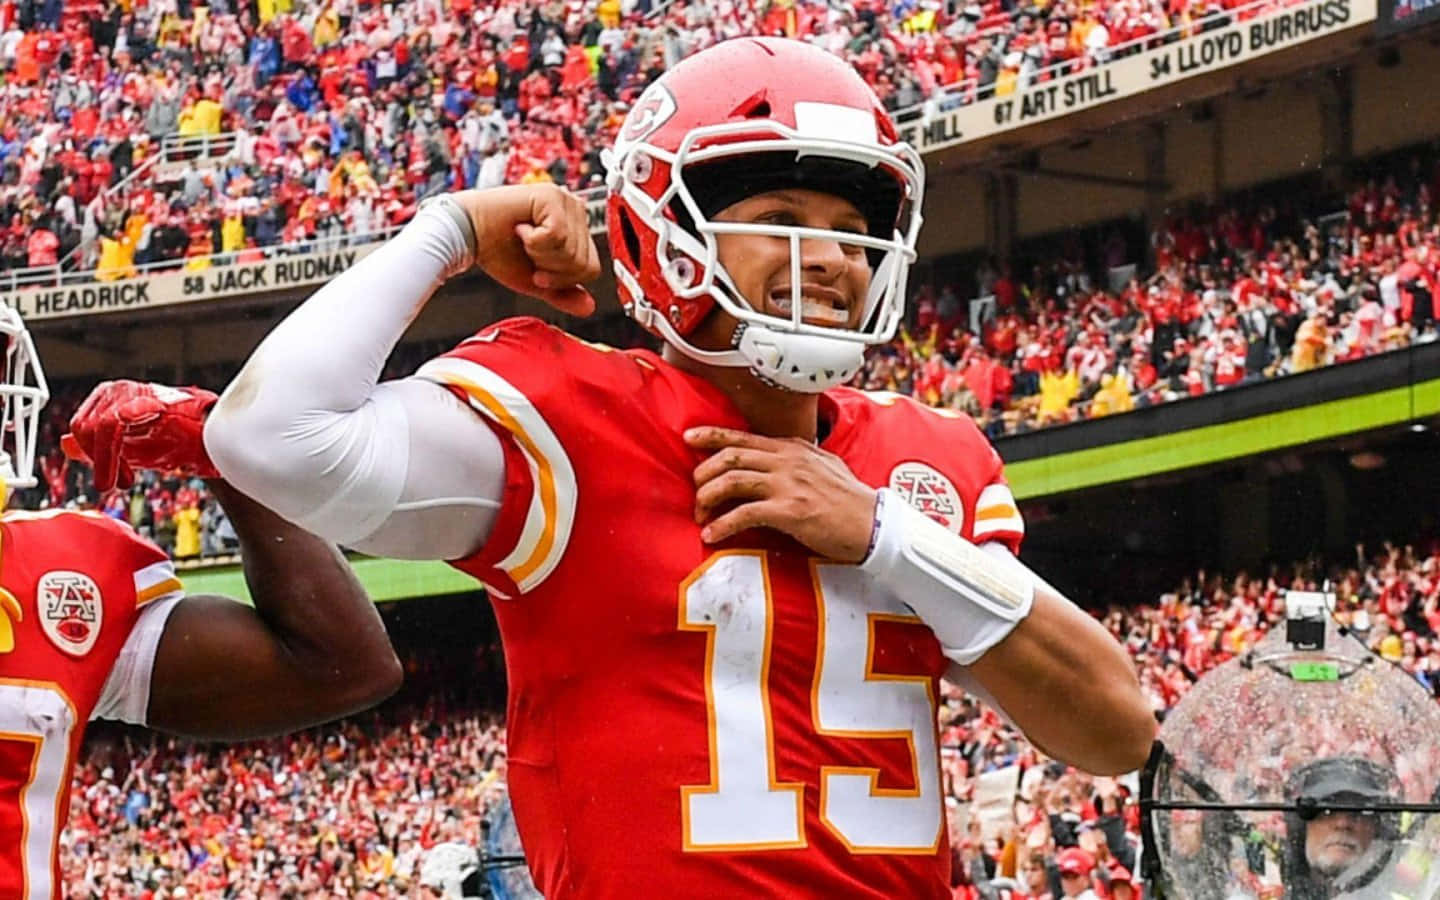 Patrick Mahomes showing his exceptional skills on the field